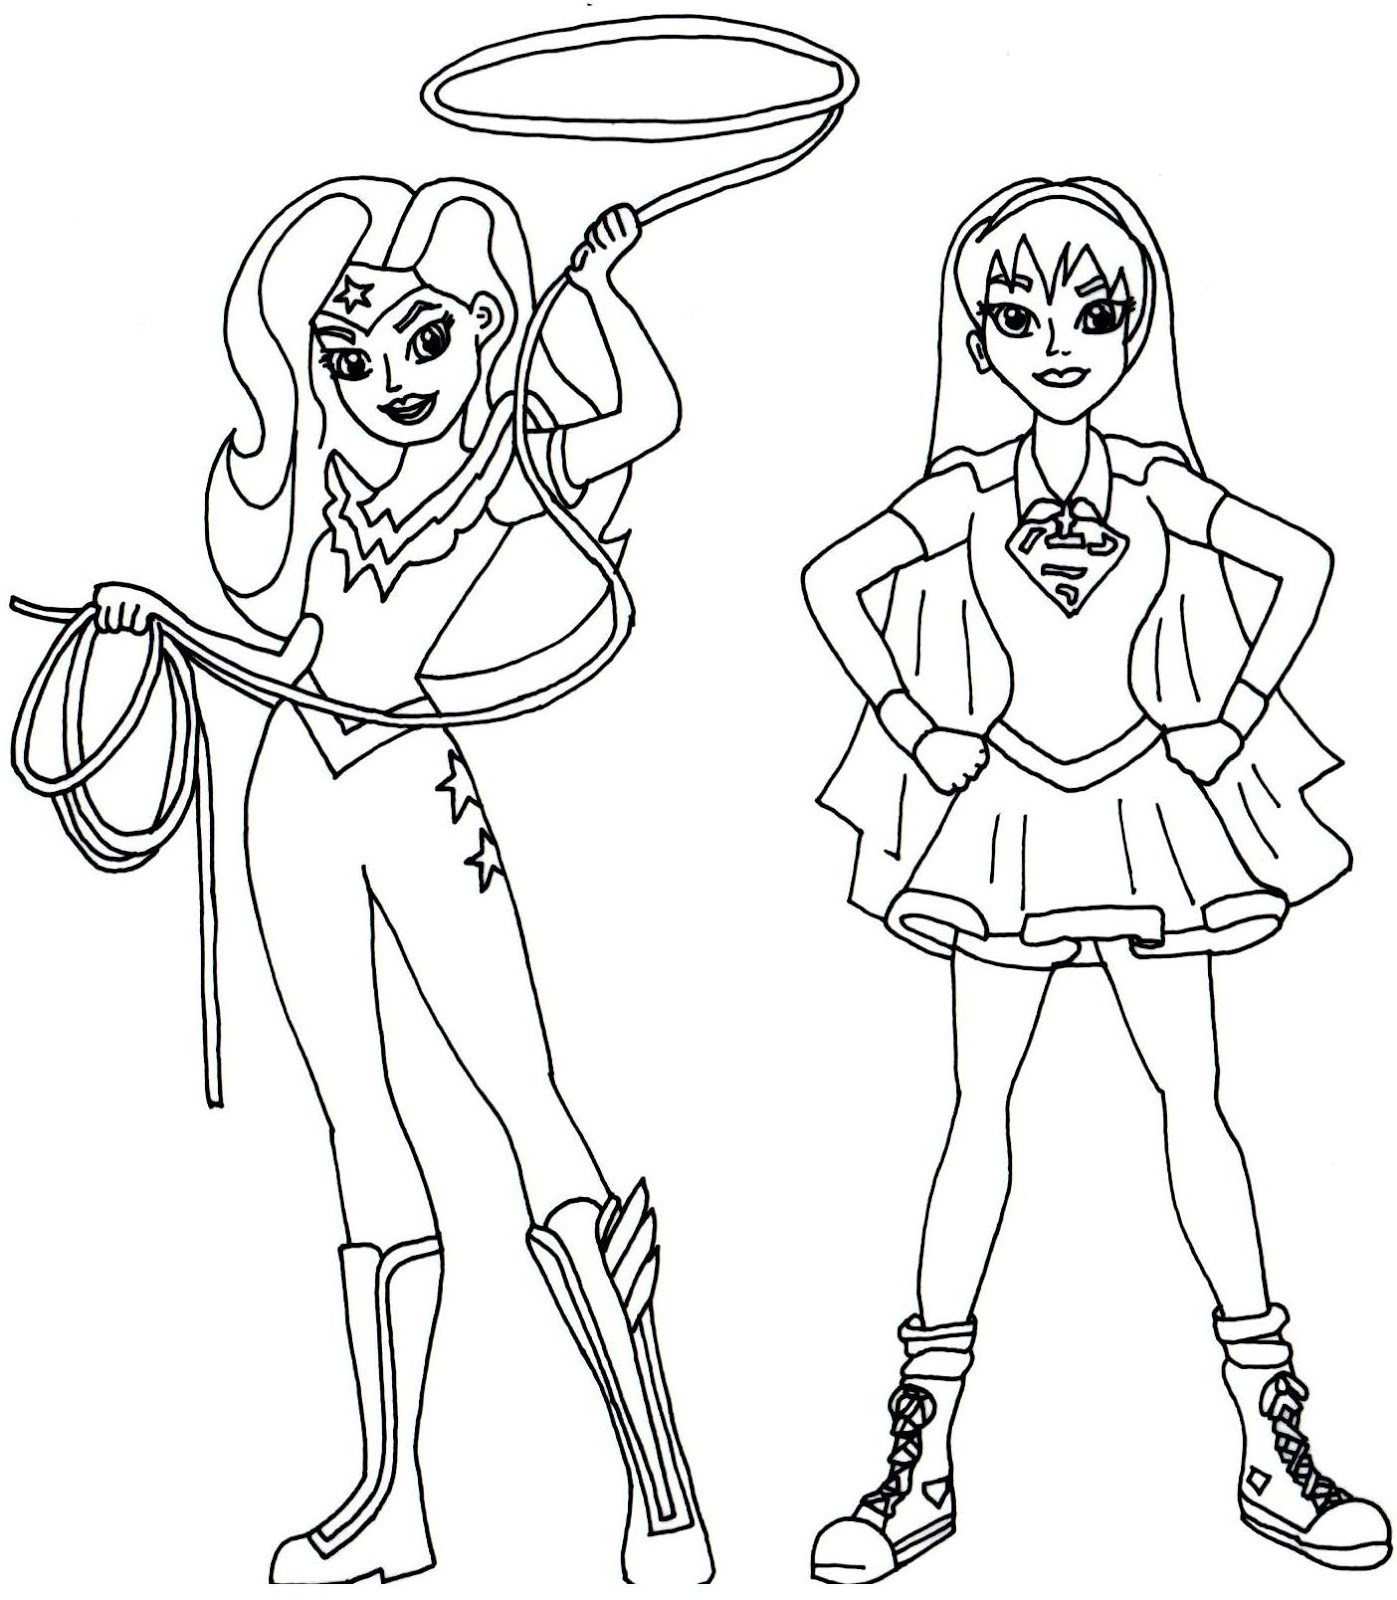 Dc Super Hero Girls Coloring Pages
 Supergirl Coloring Pages Printable Sketch Coloring Page